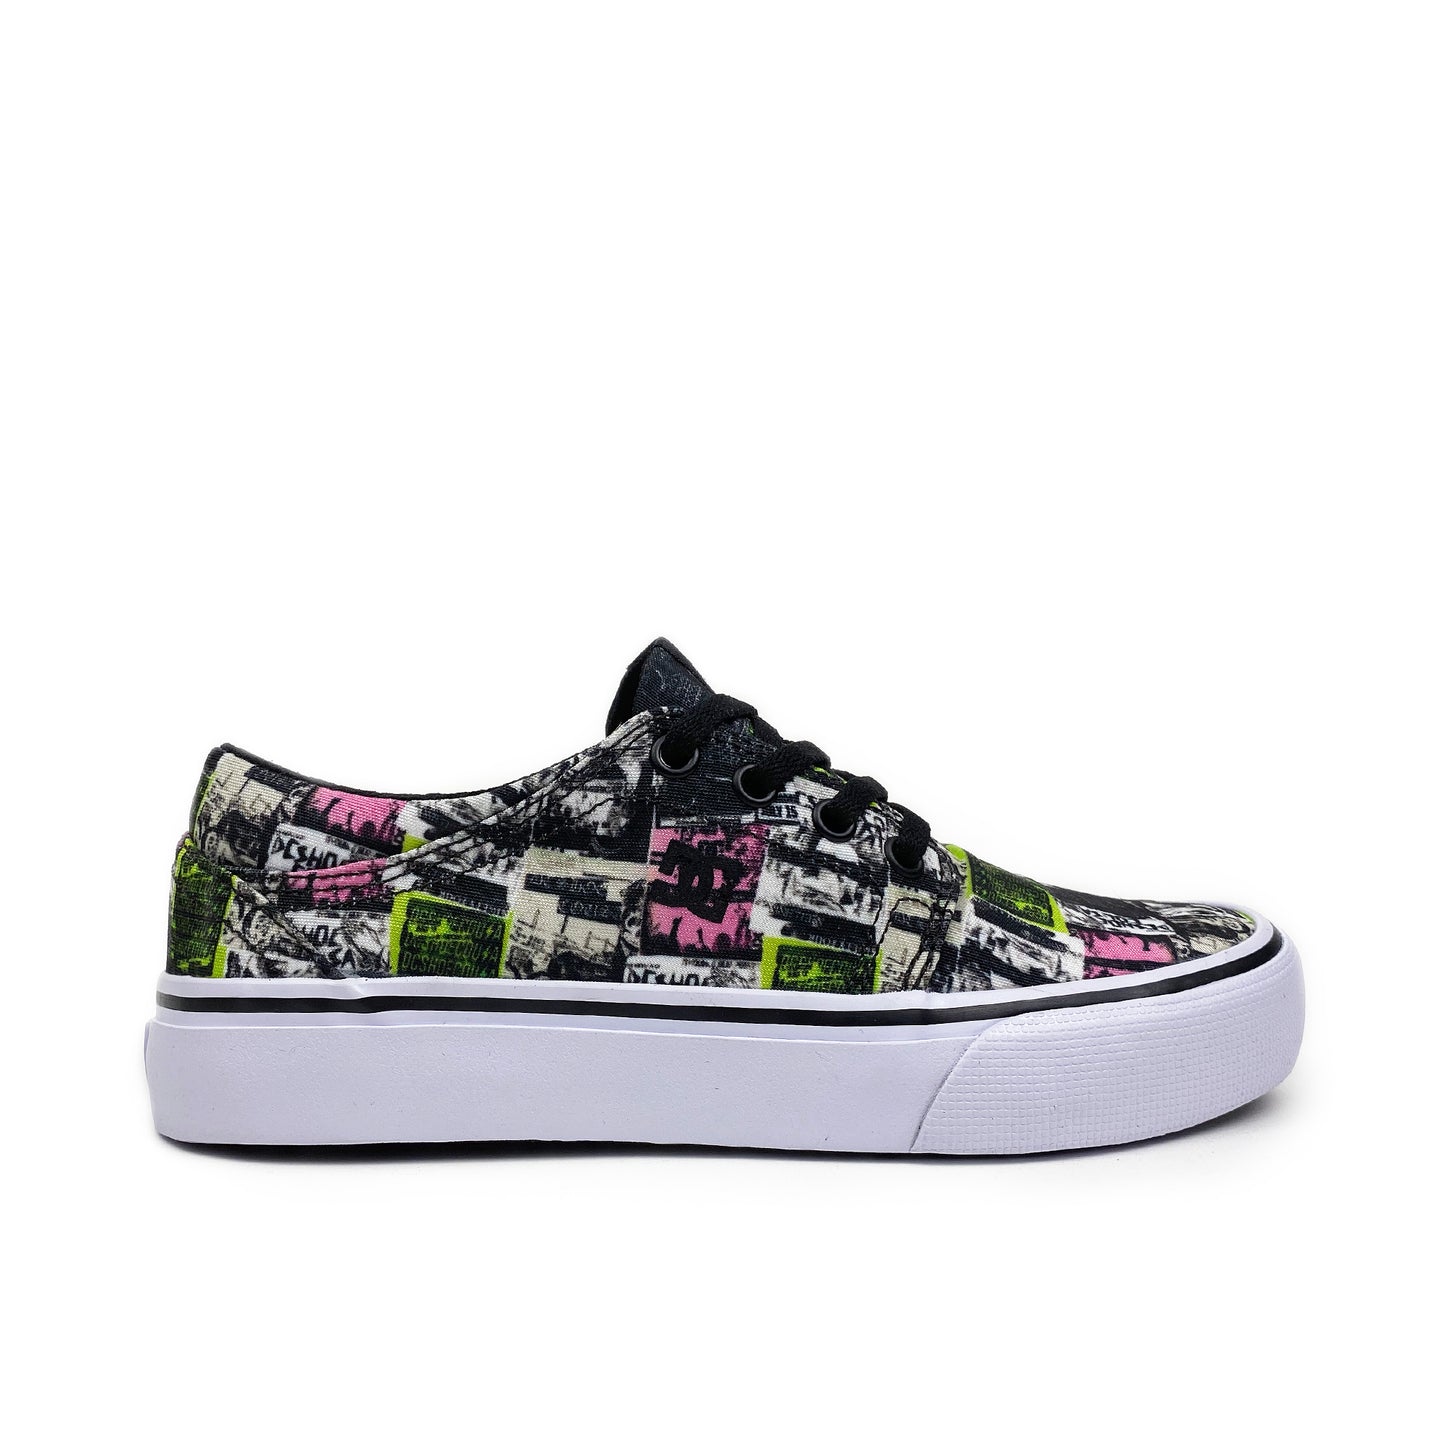 DC Trase TX SE Youth Shoes - Multi - Prime Delux Store